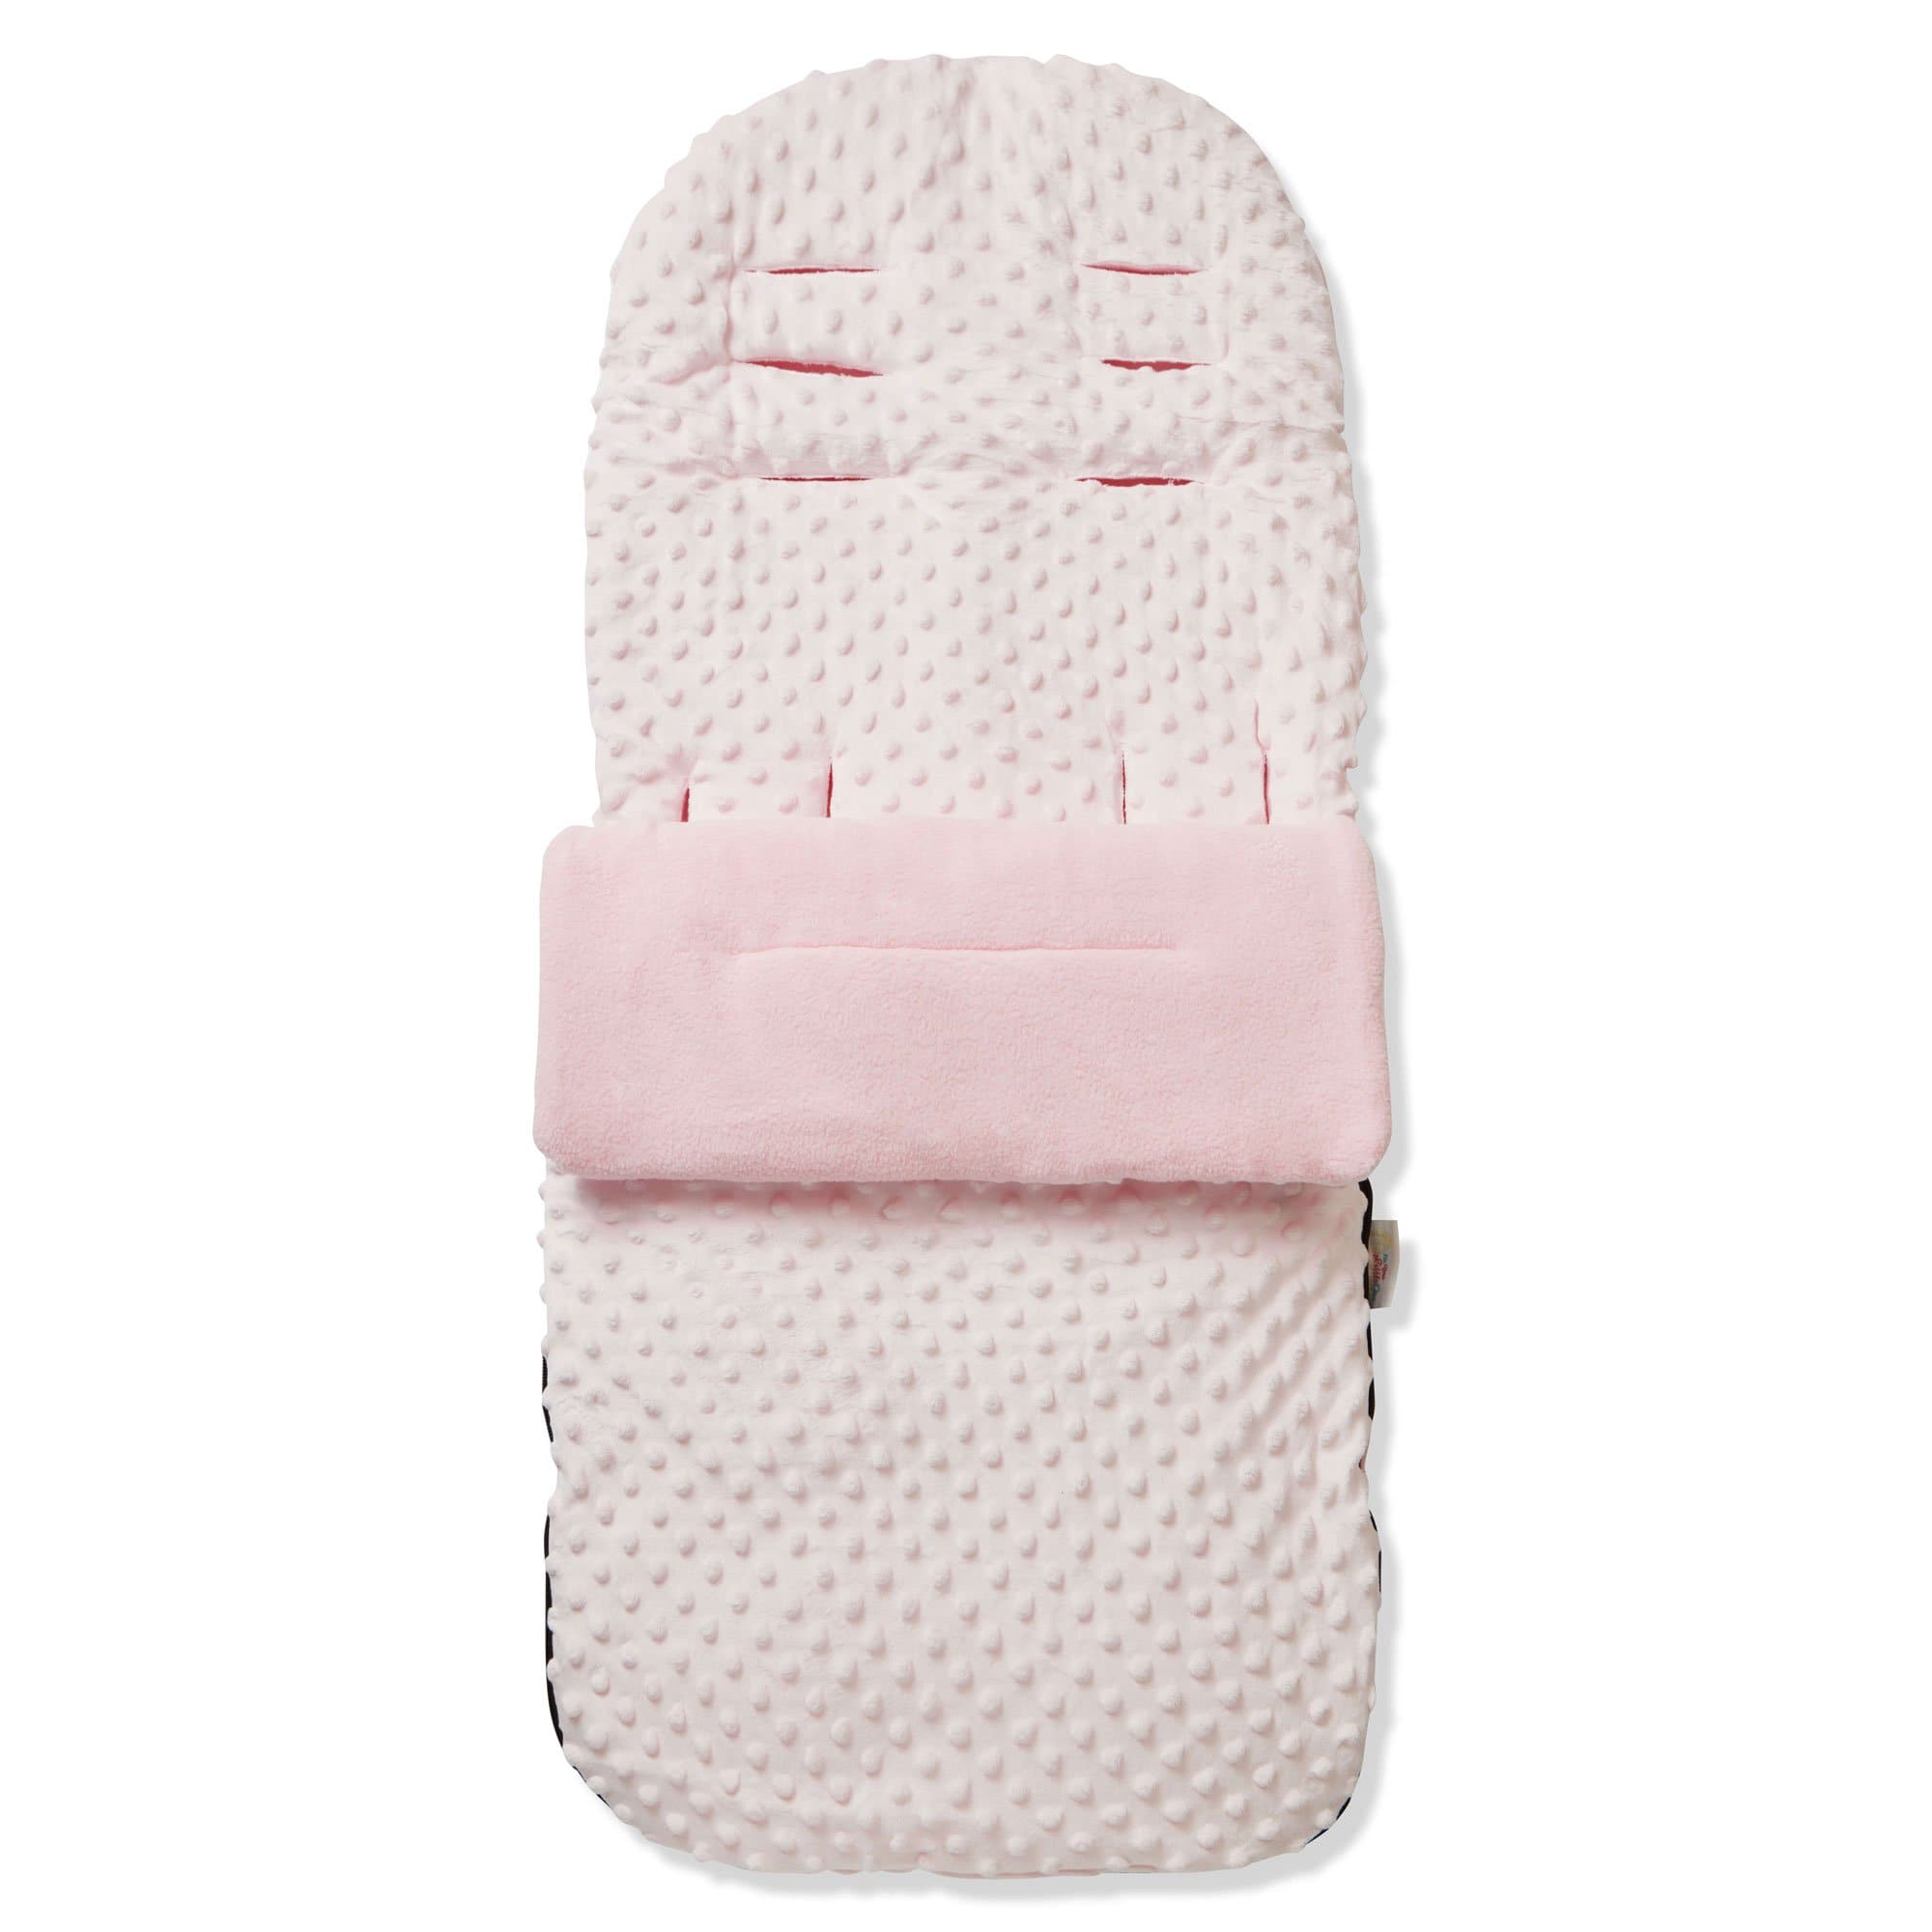 Dimple Footmuff / Cosy Toes Compatible with Gesslein - Pink / Fits All Models | For Your Little One